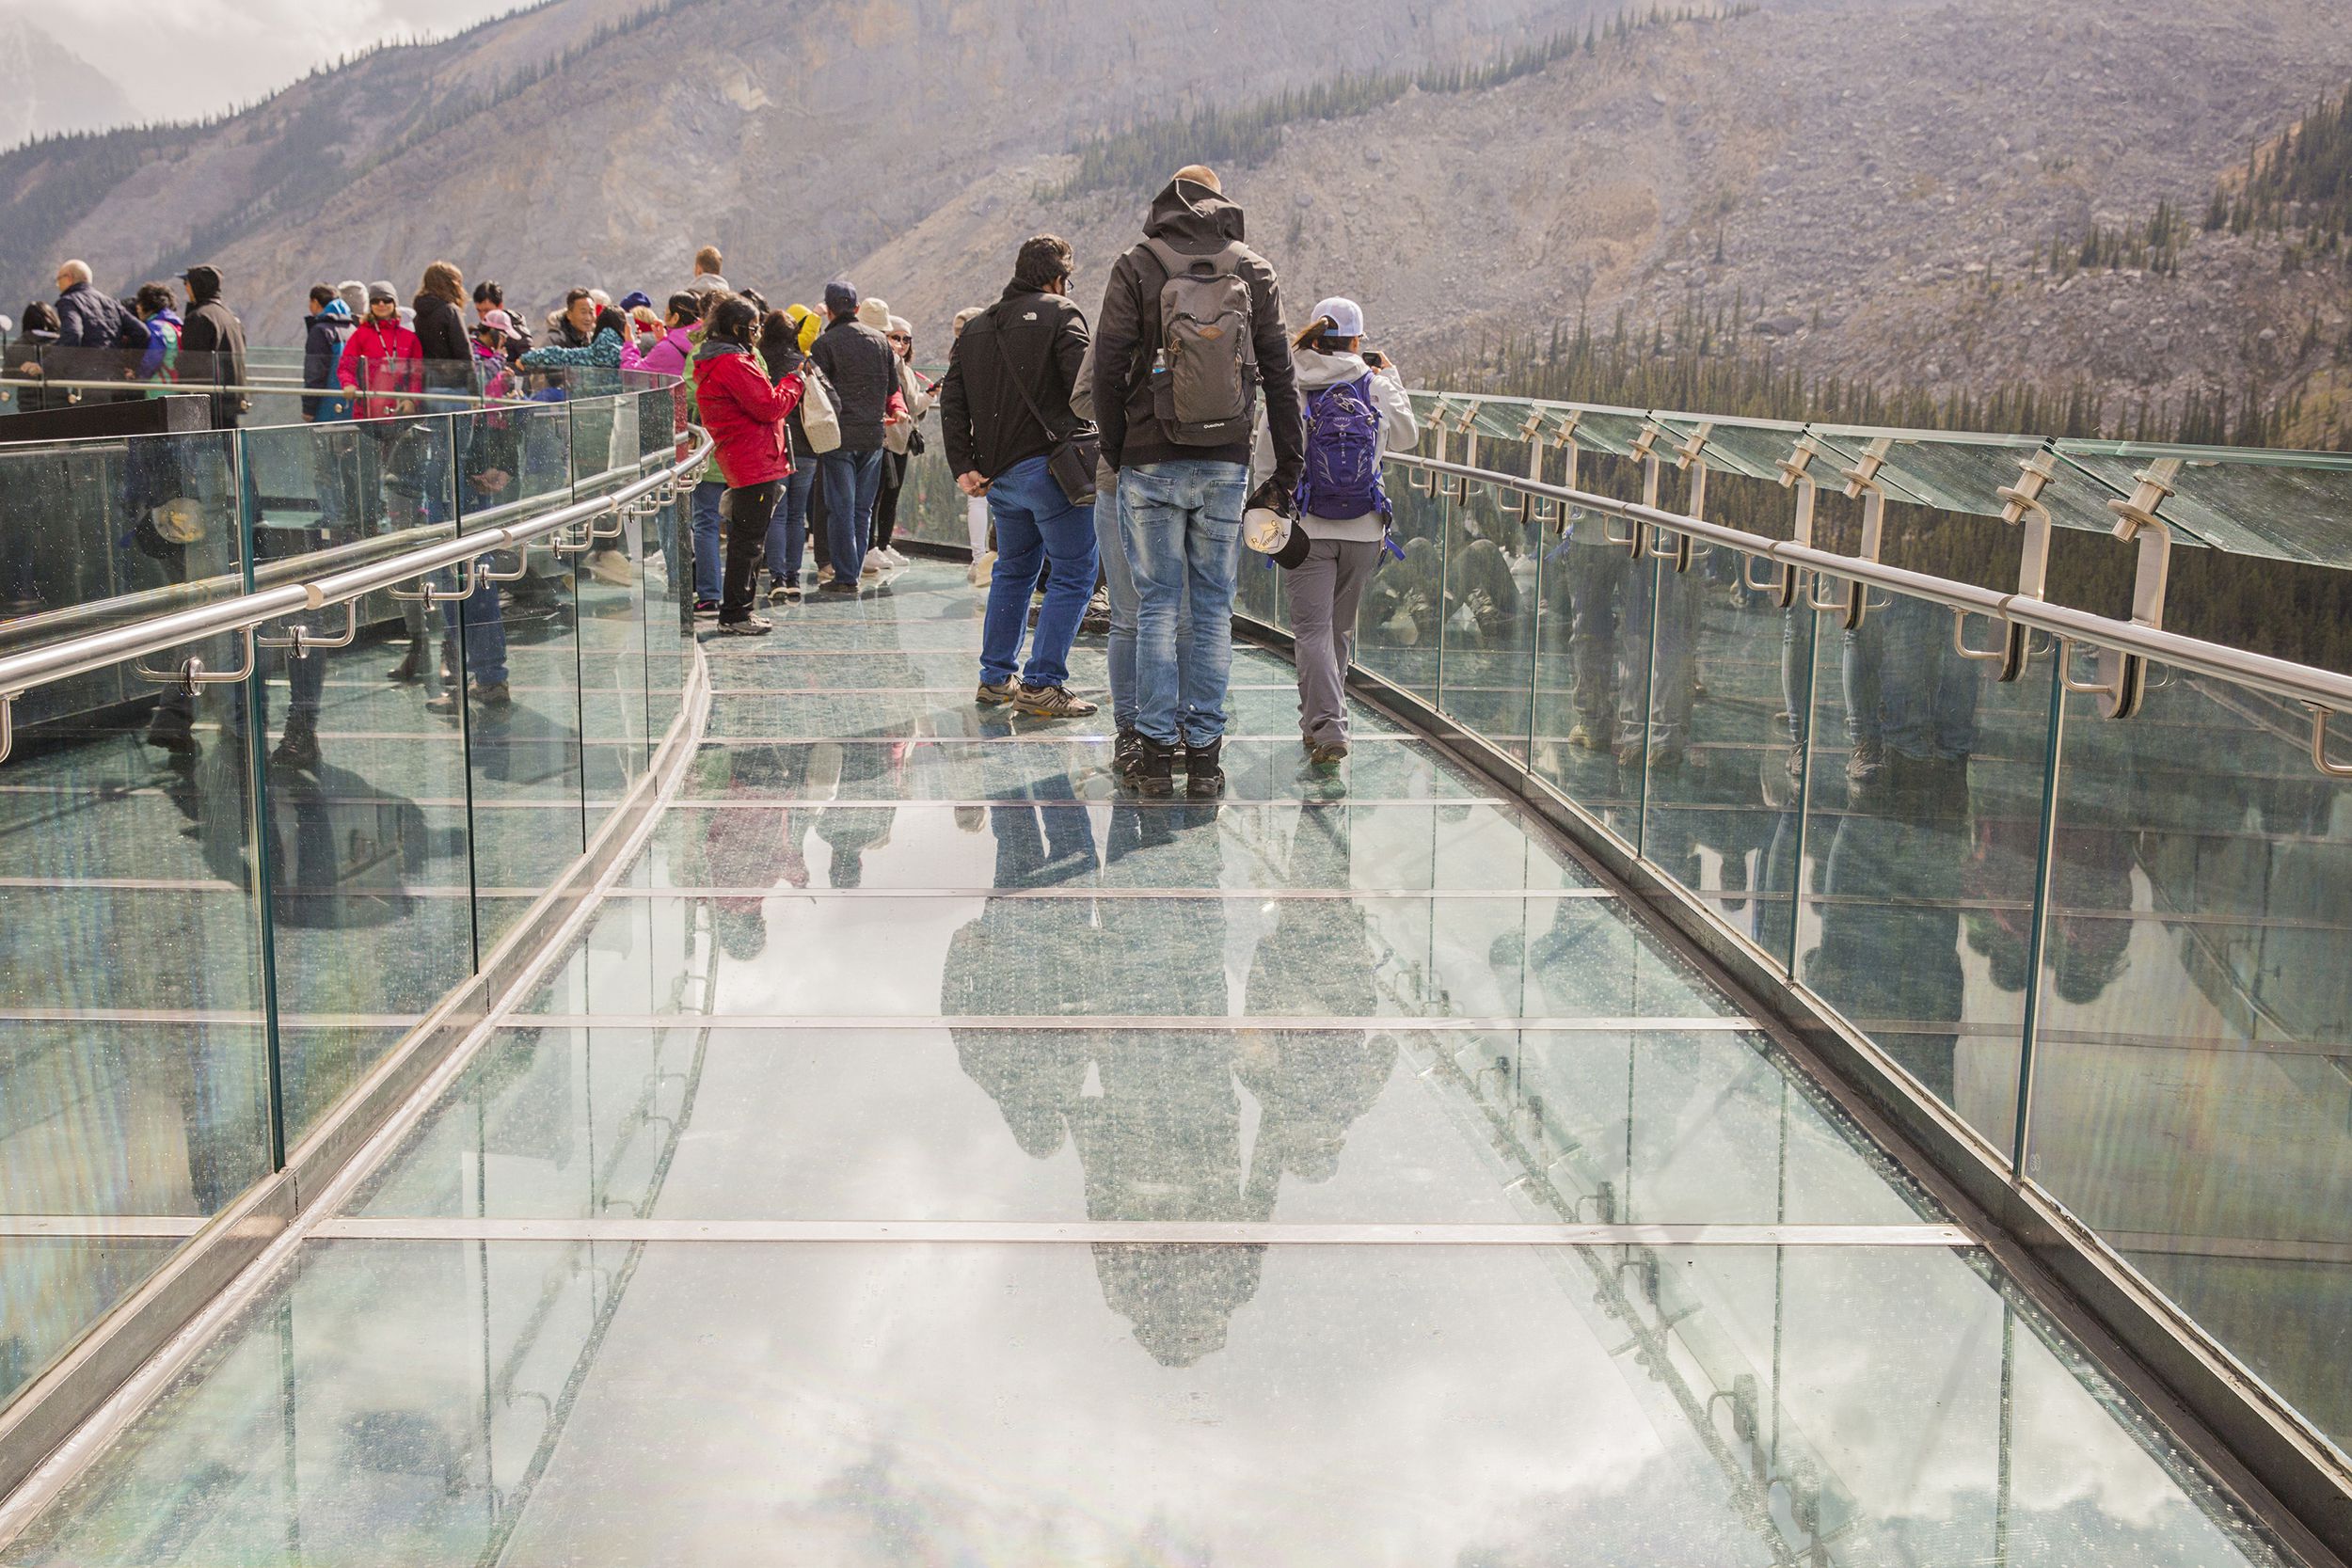 <p><strong>Jasper, Alberta</strong></p> <p>Pictures of the <a href="https://www.banffjaspercollection.com/attractions/columbia-icefield/skywalk/">Columbia Icefield Skywalk</a> certainly look stunning, but disappointed visitors say the views aren't any better than what you get from the road. Though the name suggests otherwise, the skywalk isn't actually over a glacier, and getting there requires waiting on a bus and battling crowds, especially if it's the middle of the day. "The only novelty is walking on the glass, which just <a href="https://www.tripadvisor.com/Attraction_Review-g154917-d6484980-Reviews-Columbia_Icefield_Skywalk-Jasper_National_Park_Alberta.html">wasn't worth it</a> at all to me. The best part was two mountain goats that were more fun to watch than any part of the skywalk," one frustrated TripAdvisor reviewer warns. So unless you feel a compulsive need to pay more than C$35 to stand on a glass walkway, consider sticking to the free views elsewhere in Jasper National Park.</p>